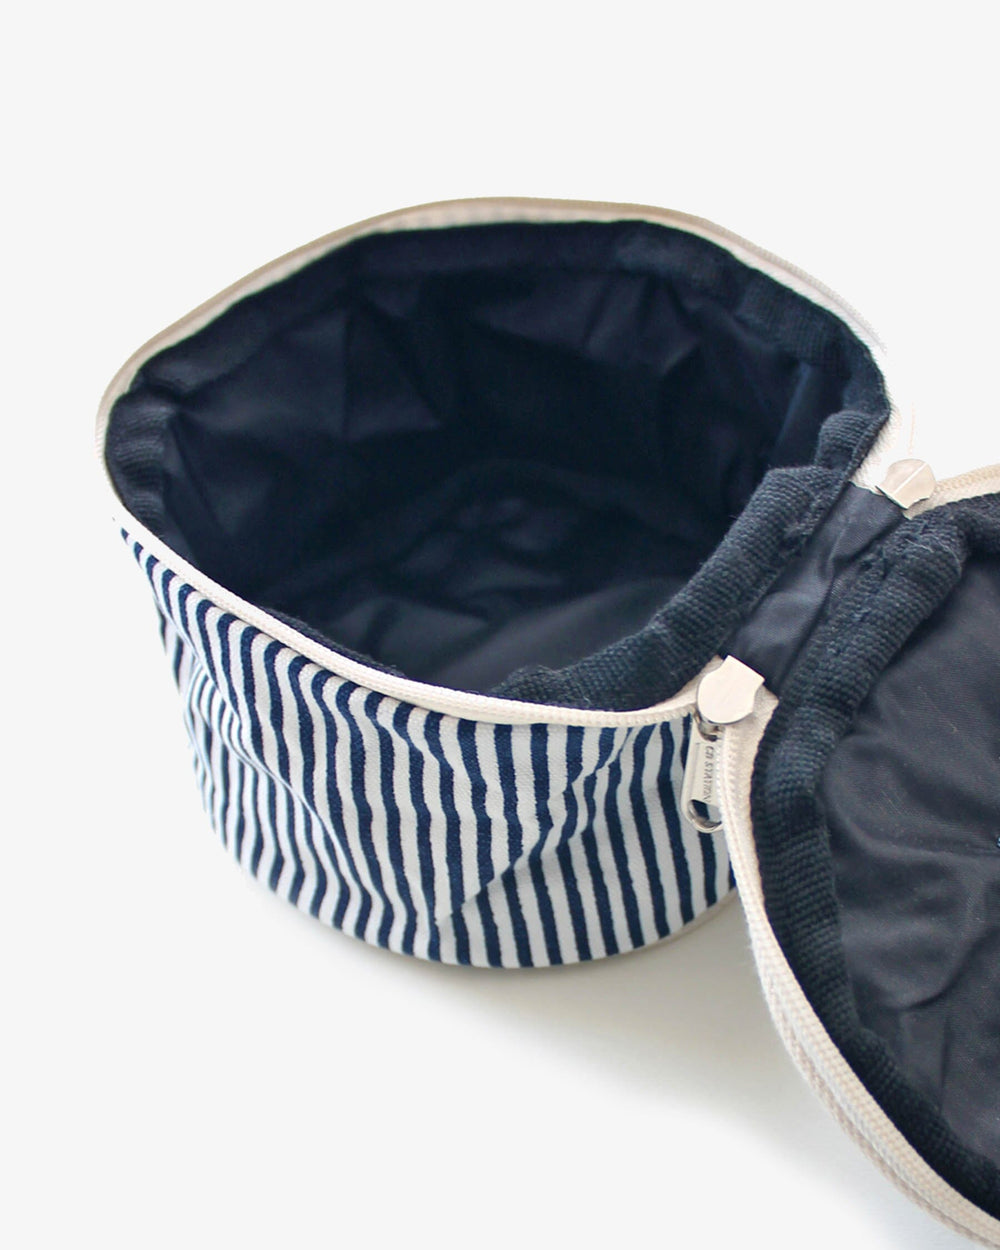 The interior view of the Southern Tide Palm Striped Circle Case by Southern Tide - Navy